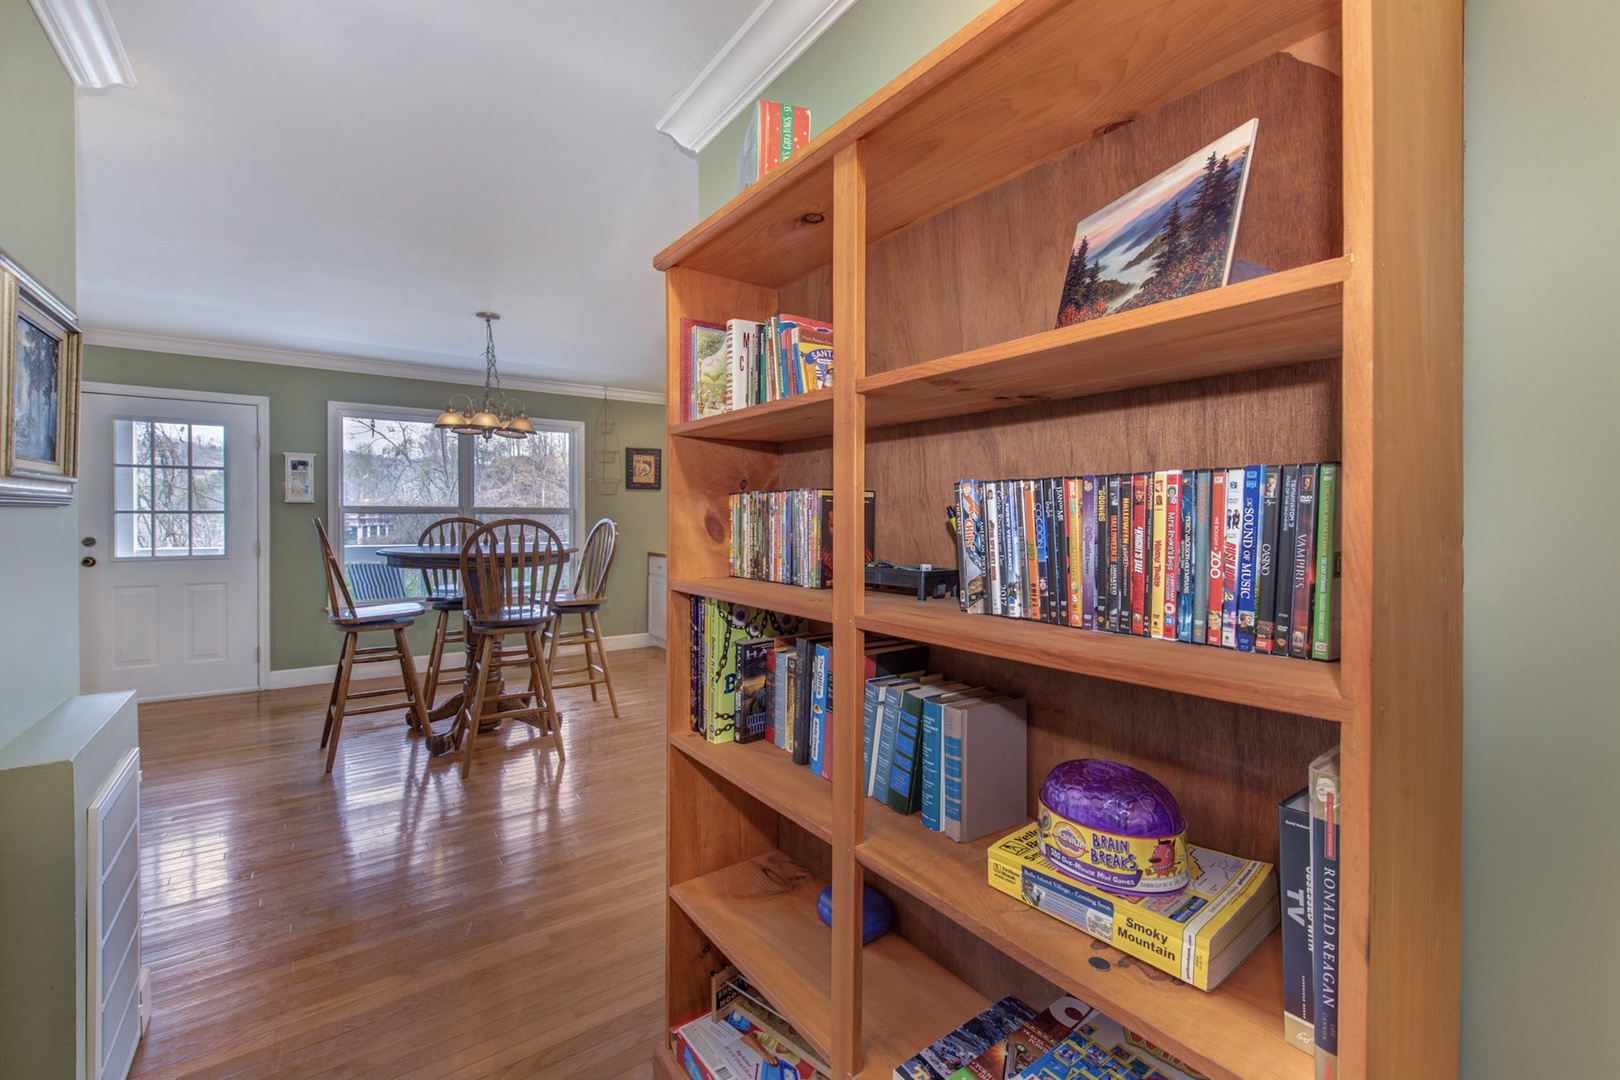 Select a movie, a book, or a game from the shelf for hours of delightful family fun